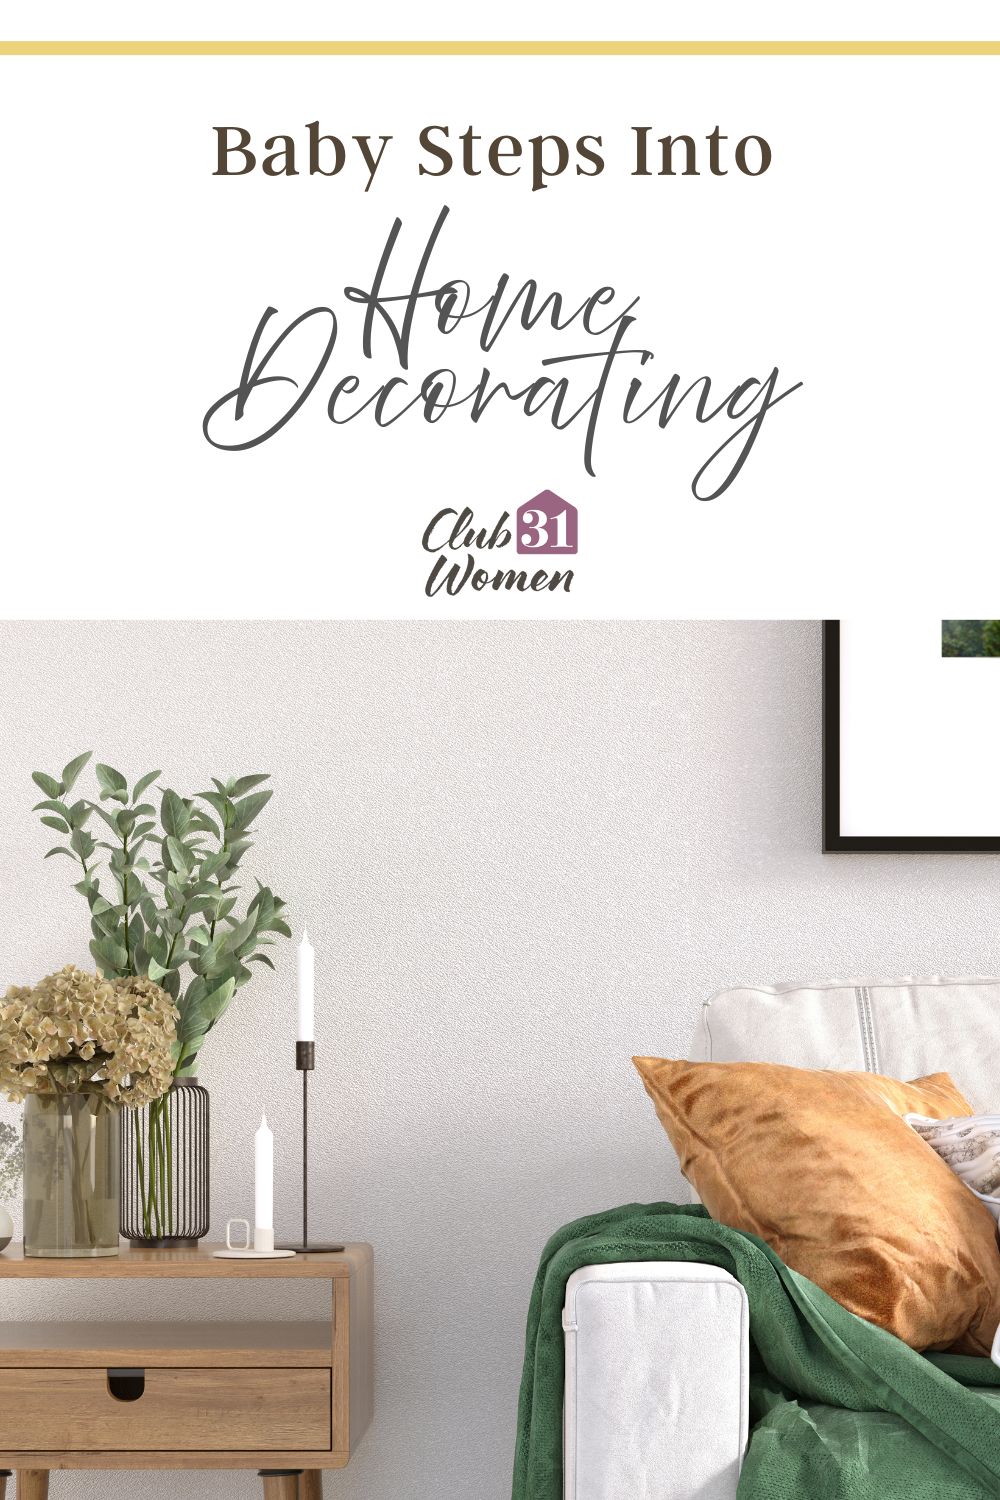 Home decorating doesn't need to be expensive or overwhelming. Start small and see how you can personalize your house into your home. via @Club31Women